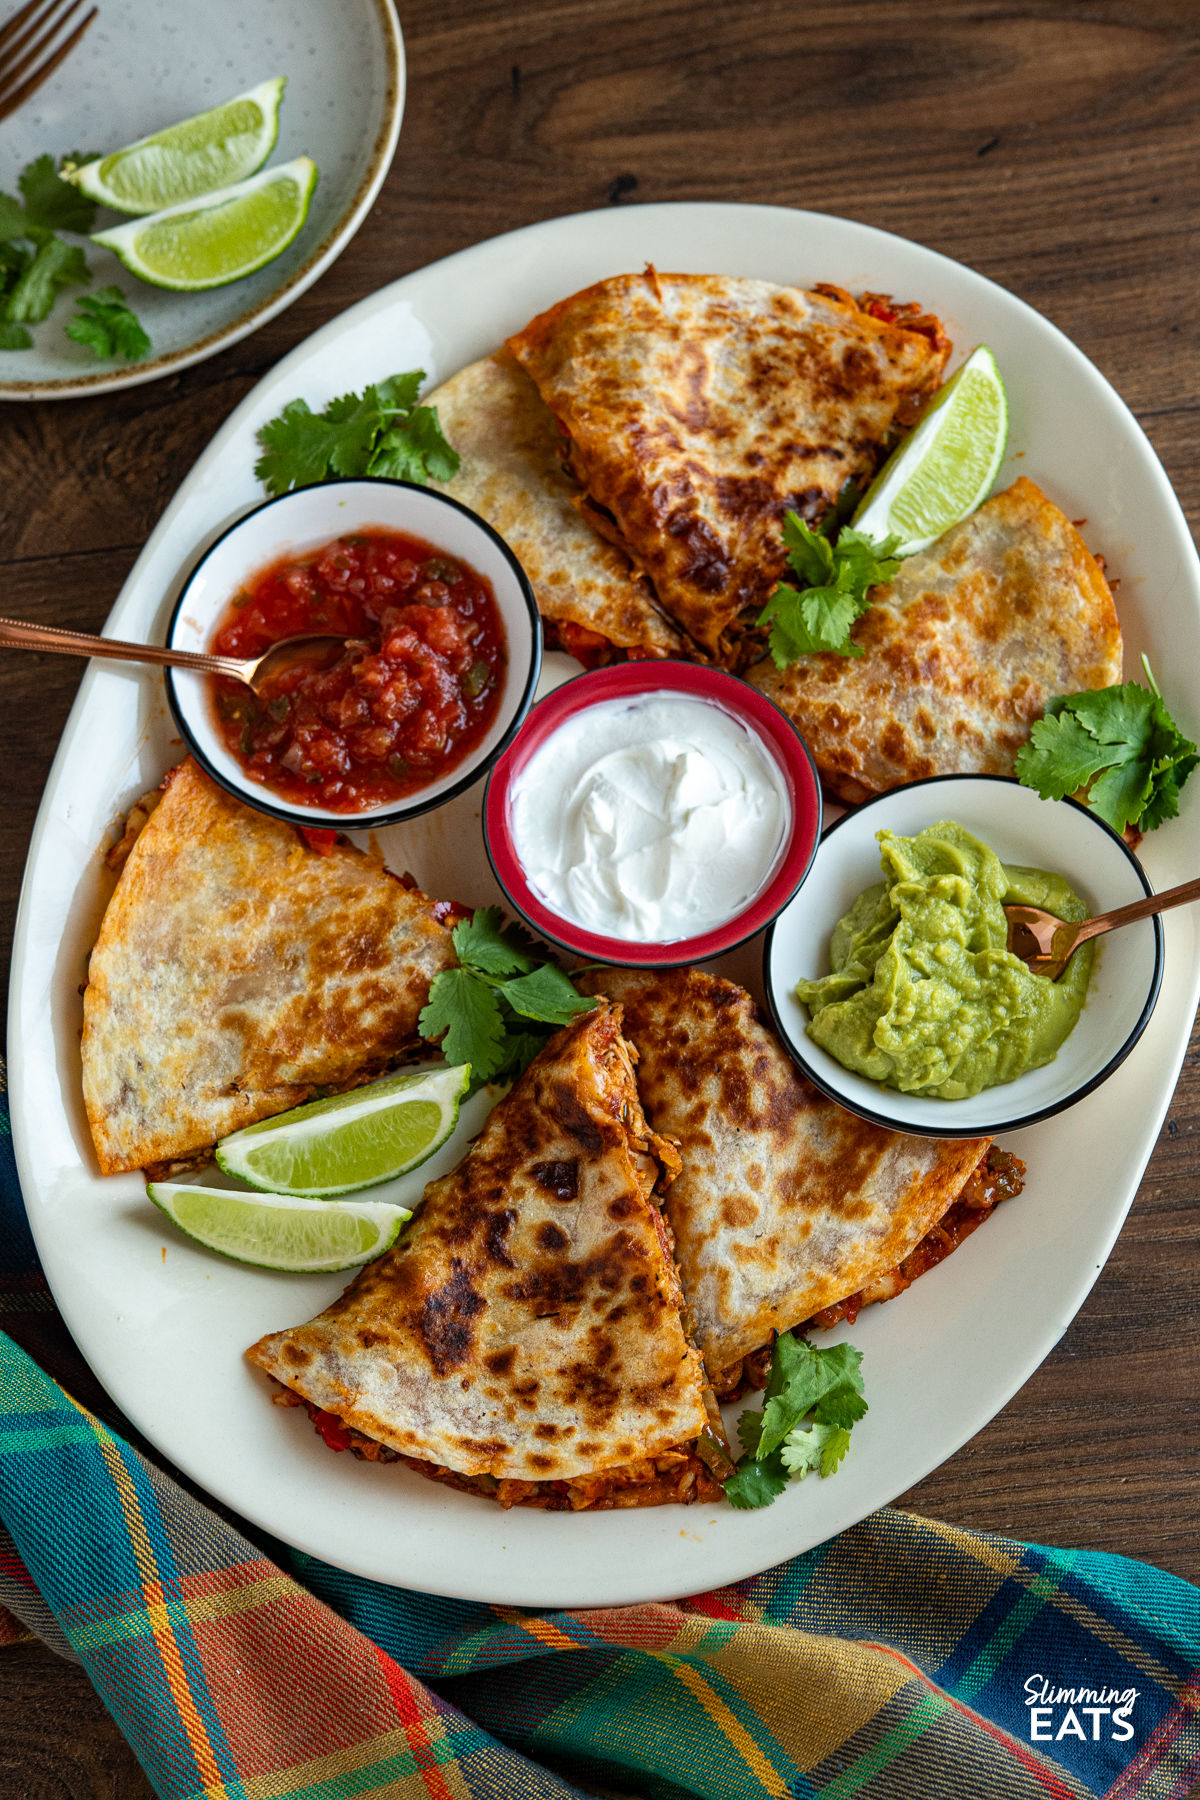 Sliced quesadilla arranged on a large cream oval plate, accompanied by small bowls of guacamole, salsa, and soured cream, garnished with scattered coriander leaves and lime wedges.